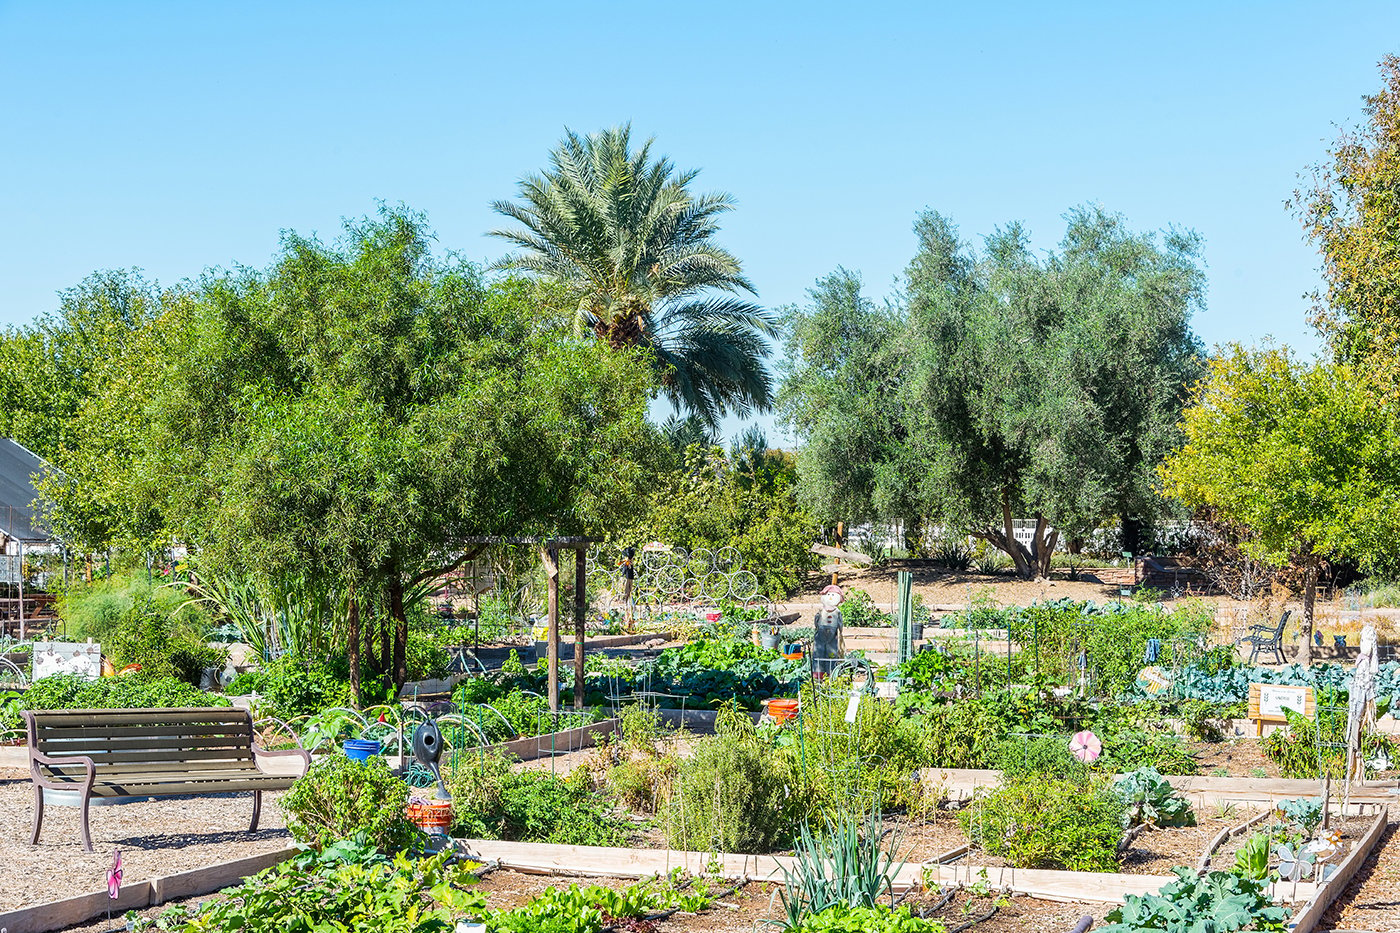 A community farm located in the master-planned community of Agritopia of Gilbert, AZ